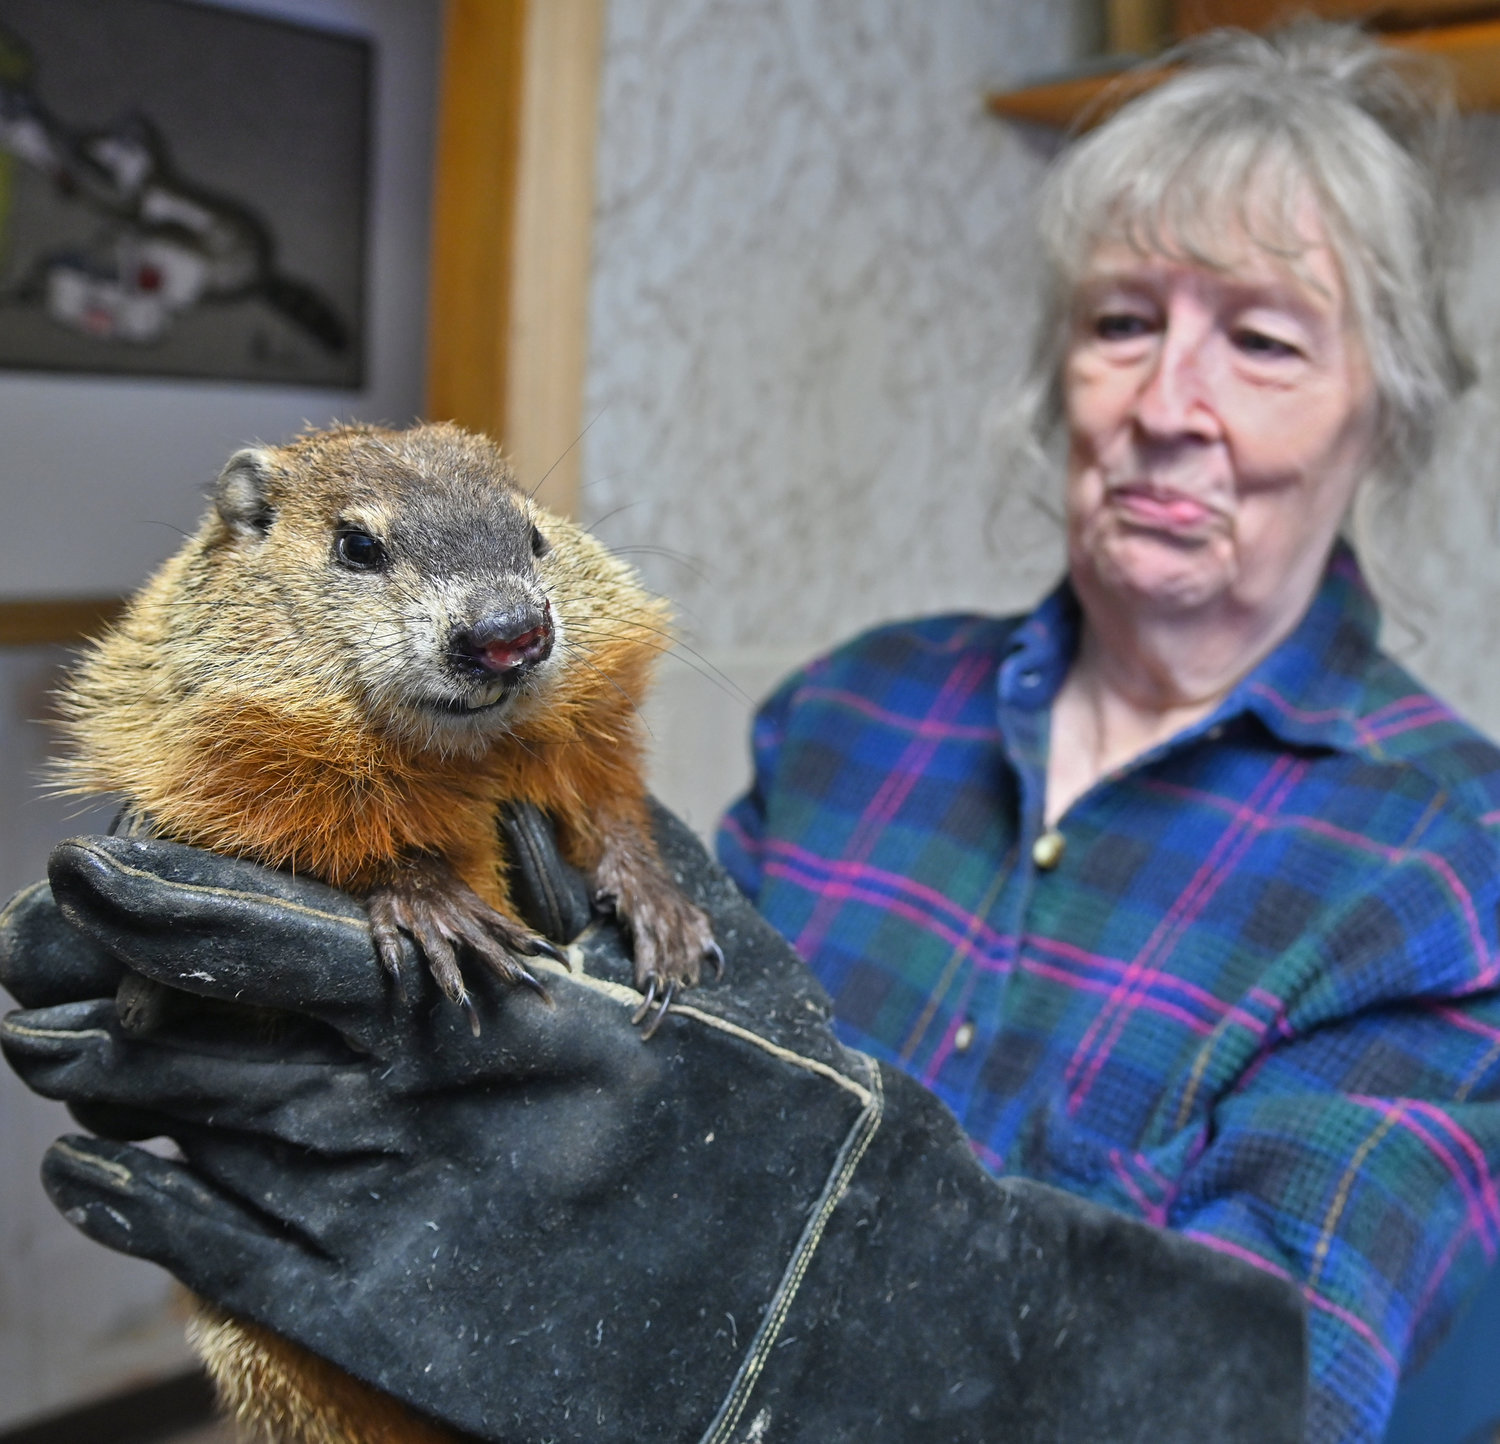 OK APRIL, YOU KNOW WHAT TO DO…. — April, a groundhog, poses for the camera with wildlife rehabilitator Judy Cusworth on Tuesday at the Woodhaven Wildlife Center in Chadwicks. April, perhaps a distant relative of the famous prognosticator Punxsutawney Phil, may get its own chance to predict spring’s arrival on Thursday, Feb. 2, also known as Groundhog Day. April came to the rehabilitation center after a good Samaritan retrieved the animal from a roadway in Sauquoit over the weekend. The groundhog, less than a year old, came out of hibernation to look for food when it injured its nose on the road. The Groundhog Day lore comes from the Pennsylvania Dutch superstition that if a groundhog emerges from its burrow on Feb. 2 and sees its shadow, it will retreat to its den and winter will go on for six more weeks; if it does not see its shadow, spring will arrive early.